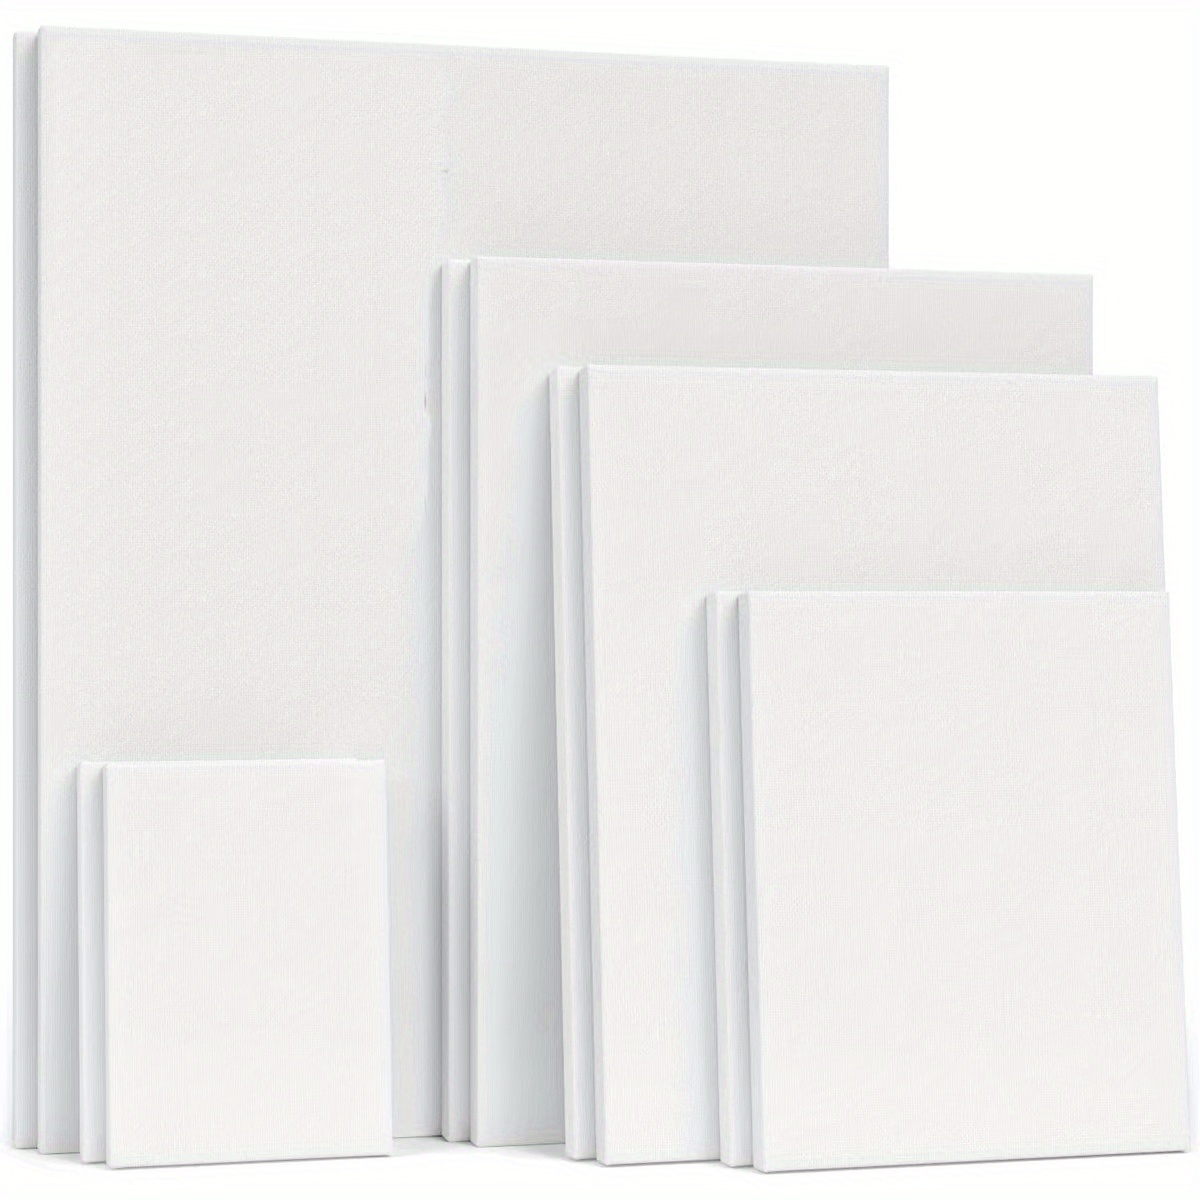 Skyouths Canvases for Painting, 40x30,30x20, 20x15, 8 Set Stretched White  Canvas with Petal Paint Tray Palettes & Tape, Artist Canvases Frame Board